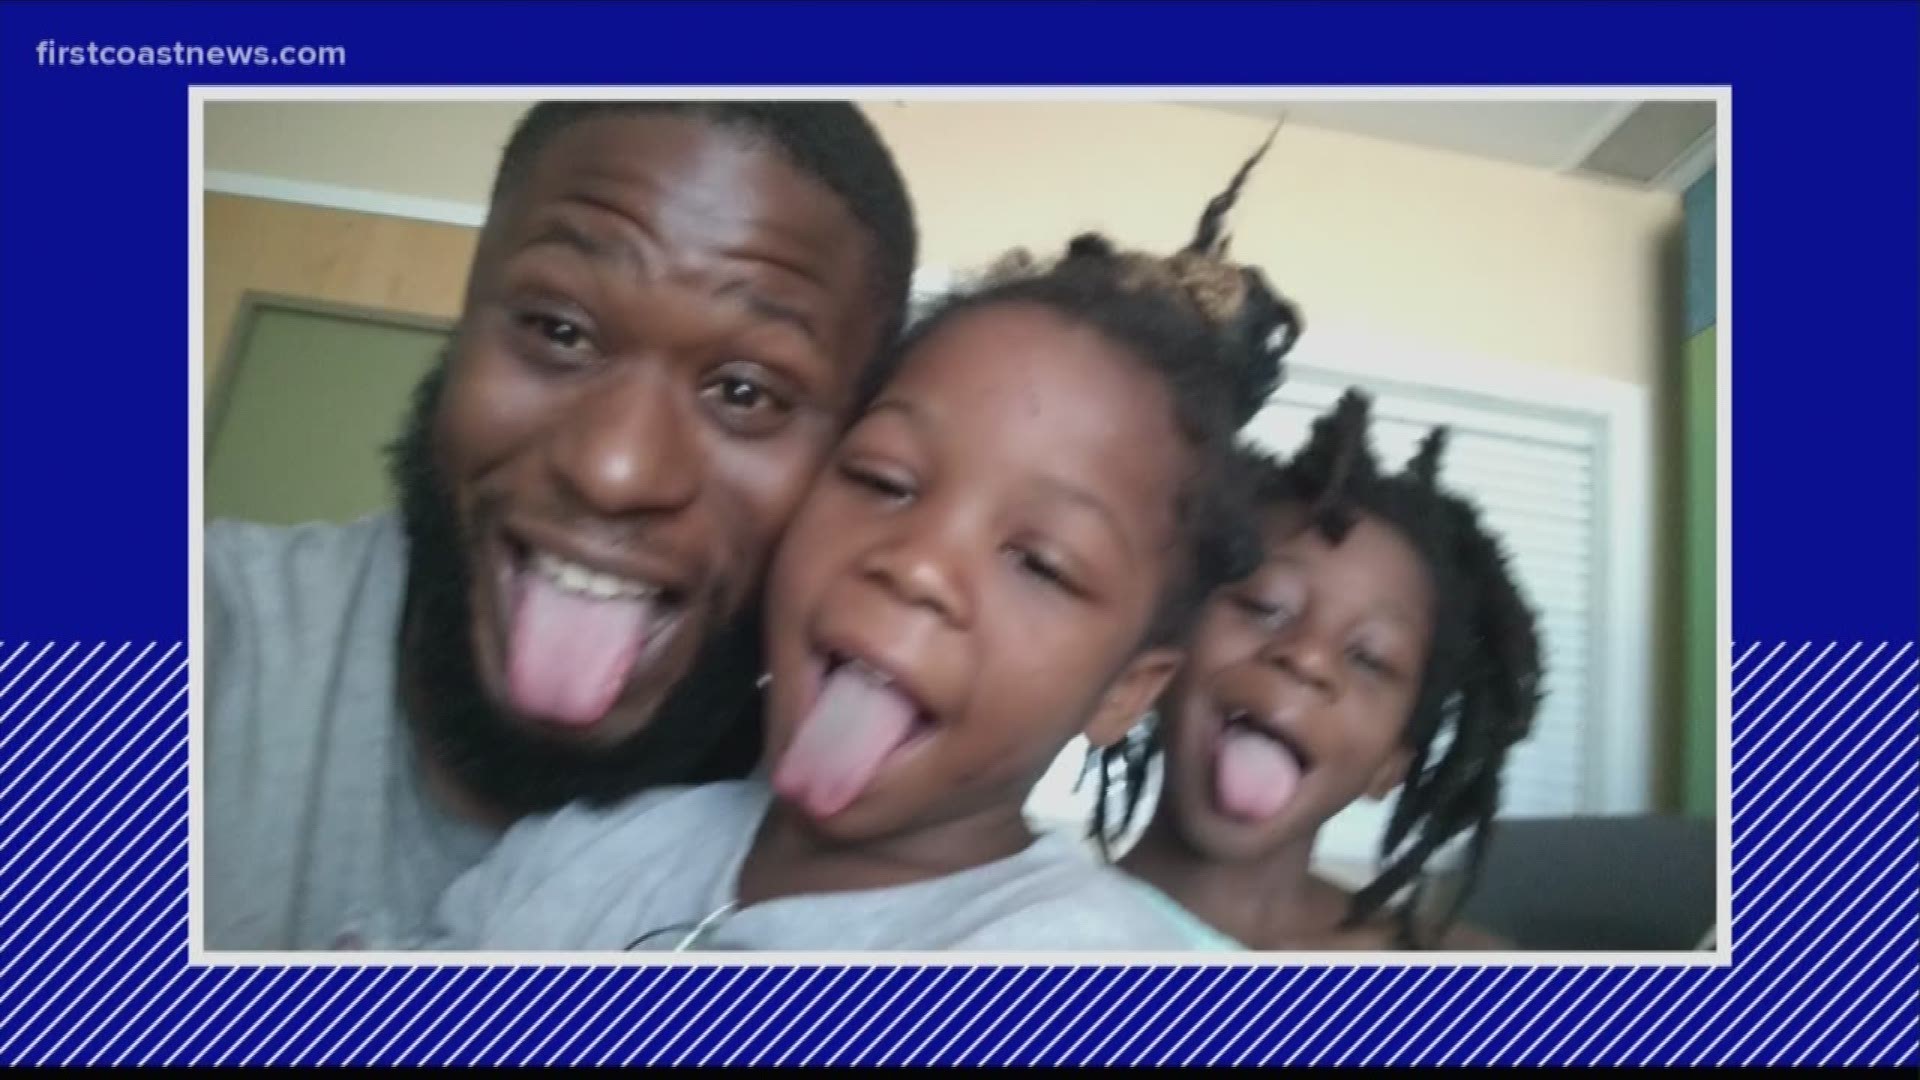 Brian Williams shared photos of himself smiling with Braxton and Bri'ya Williams after the trio were reunited, saying "Got my babies back, thank God."